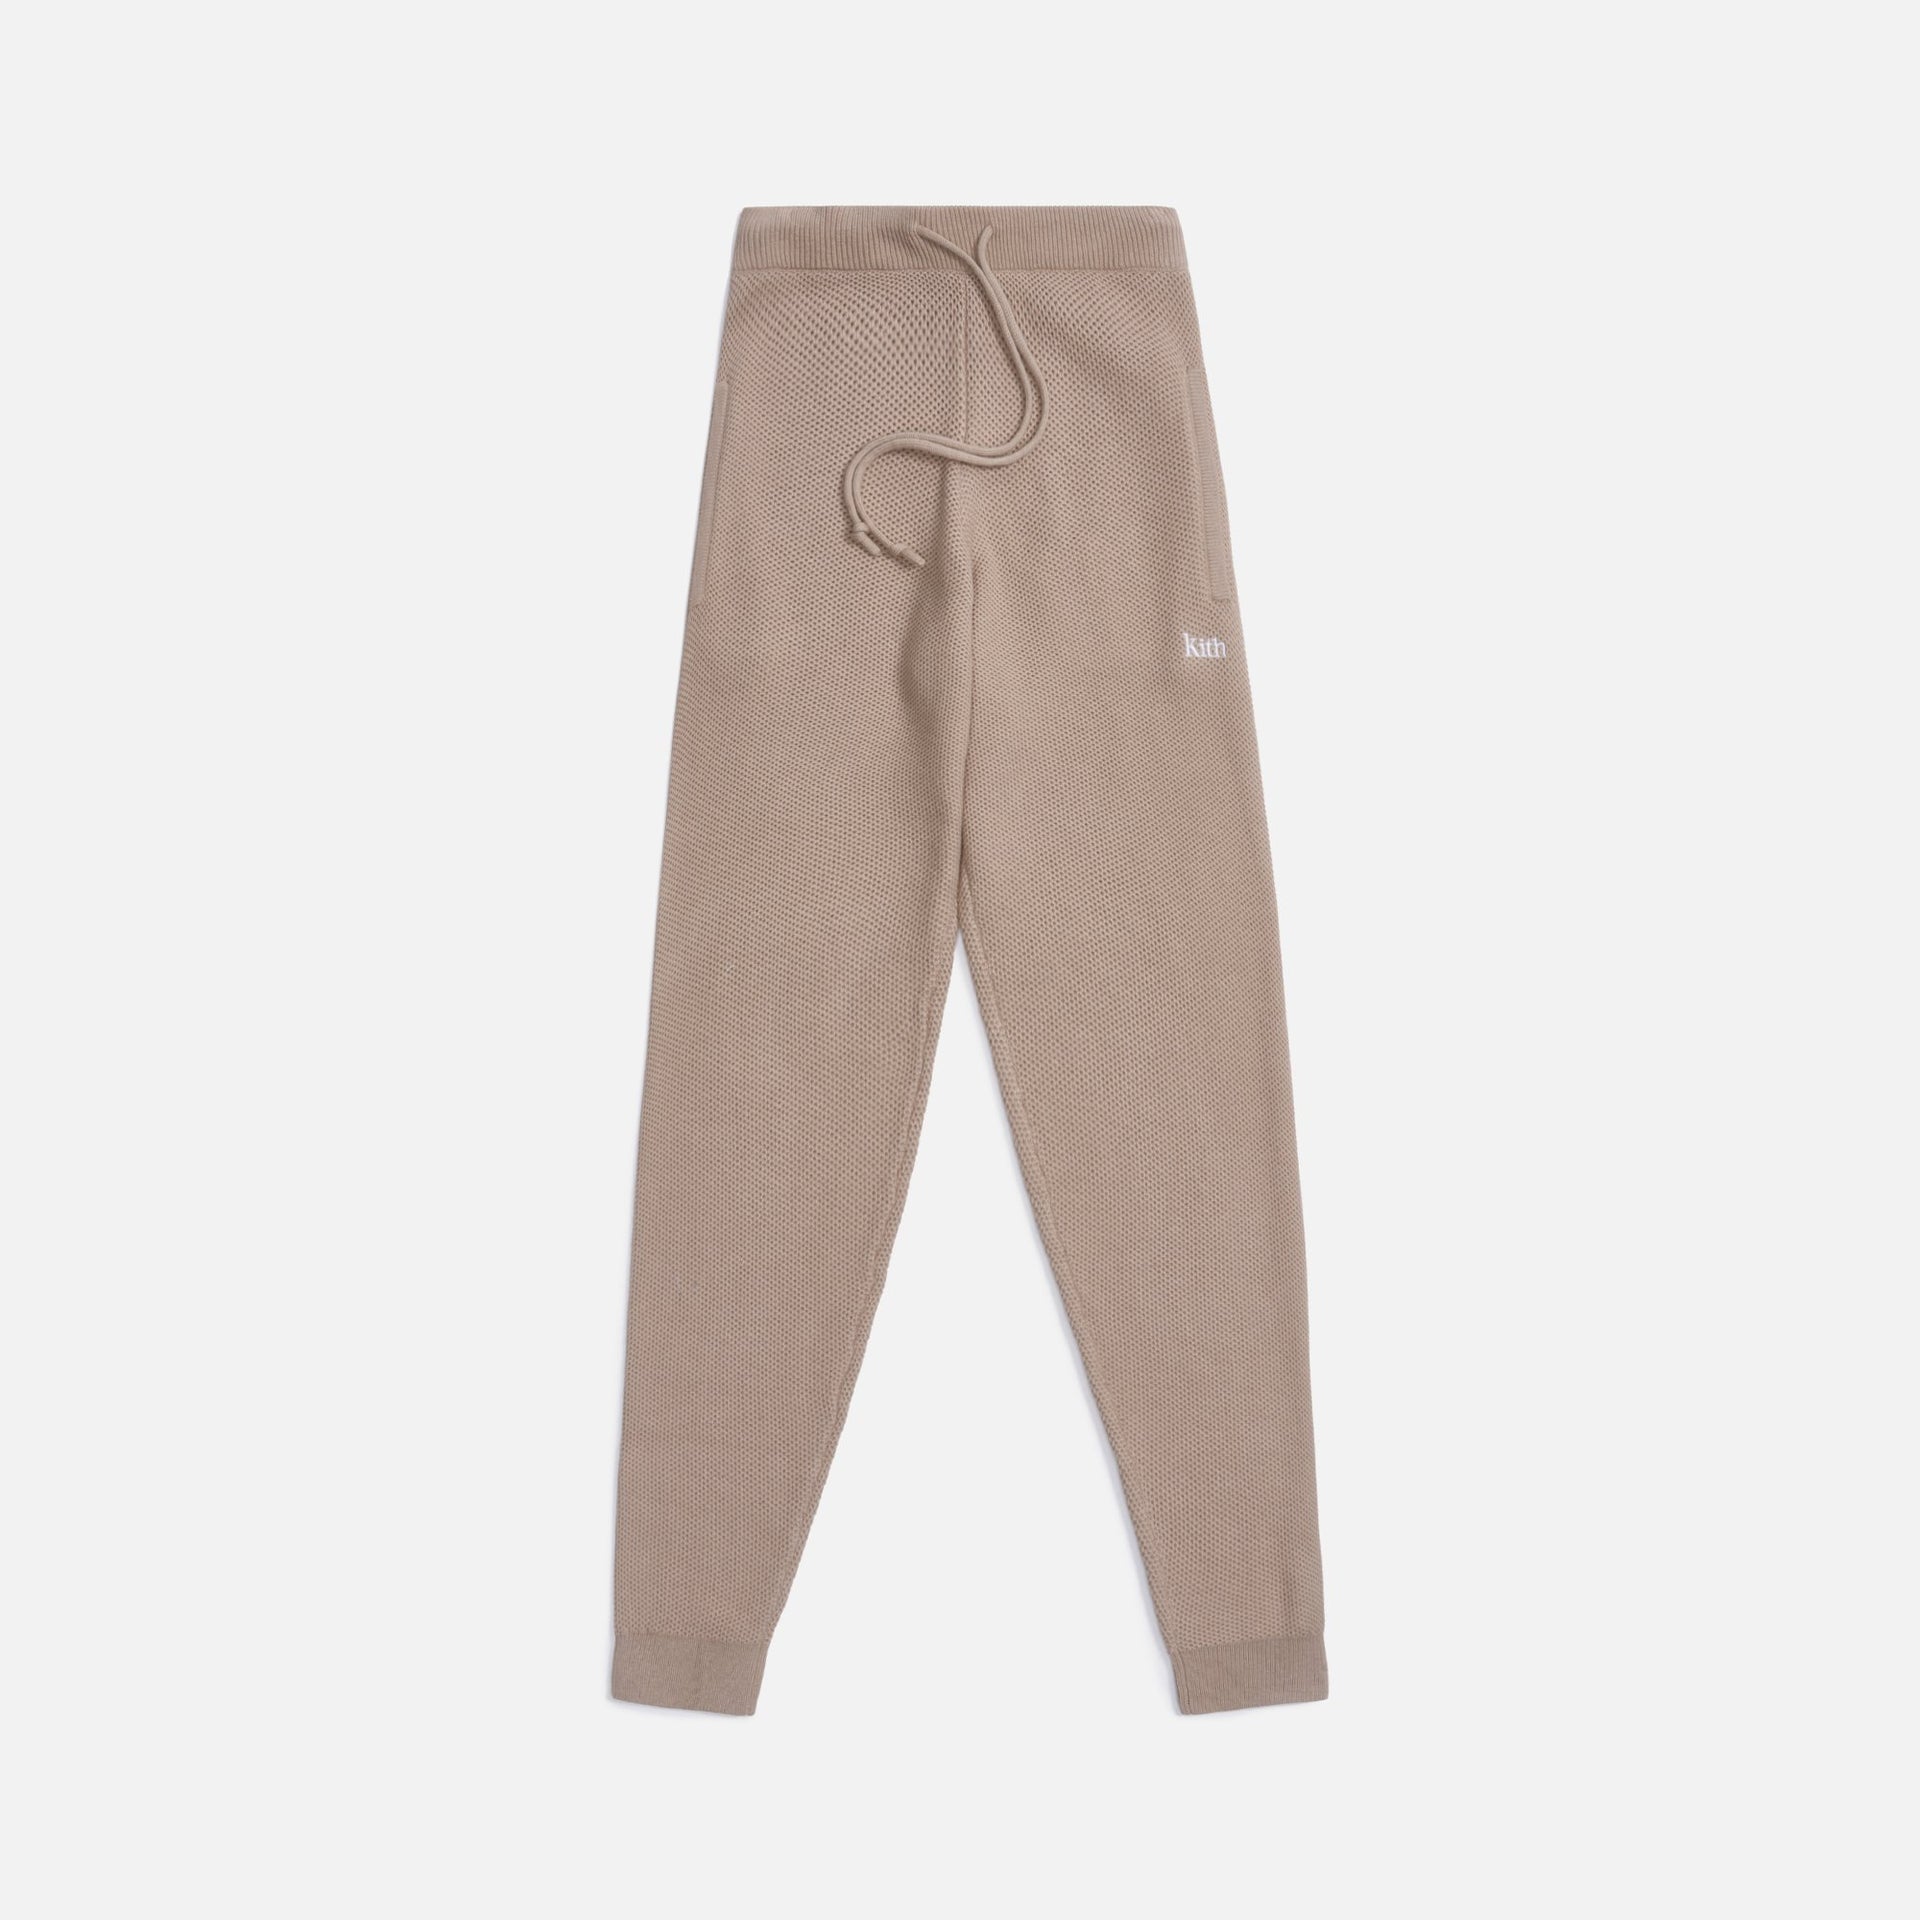 Kith Women Beverly Joggers - Chai